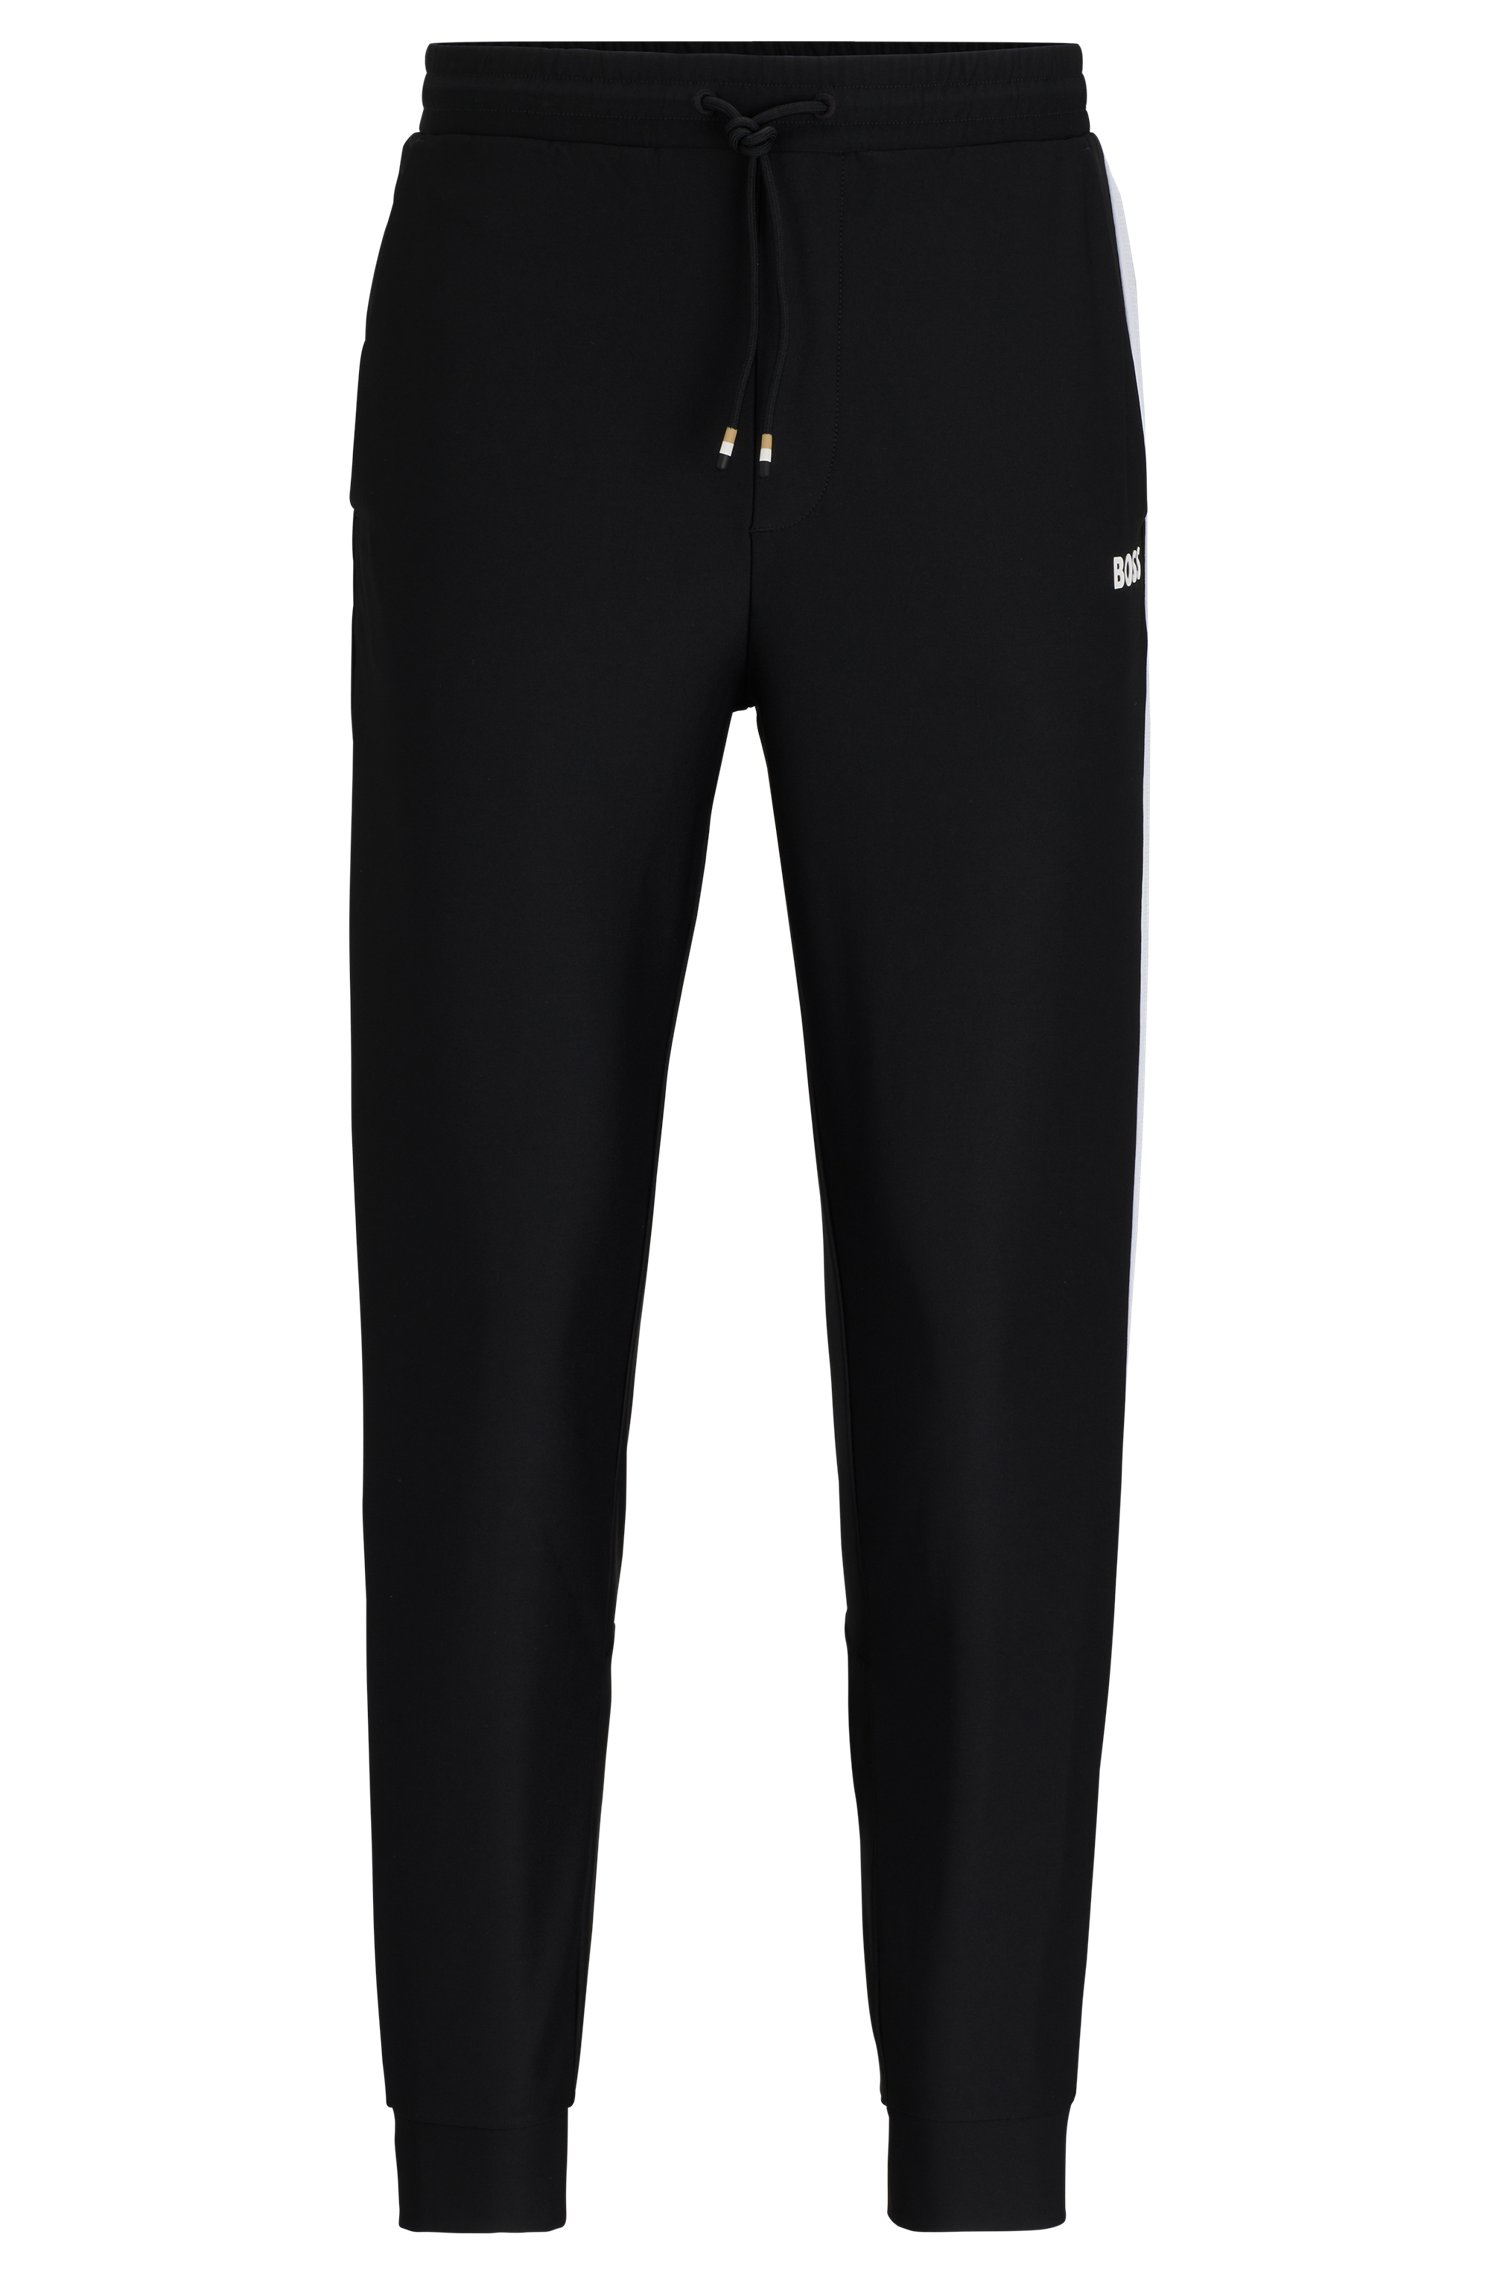 BOSS x Matteo Berrettini tracksuit bottoms with contrast tape and branding